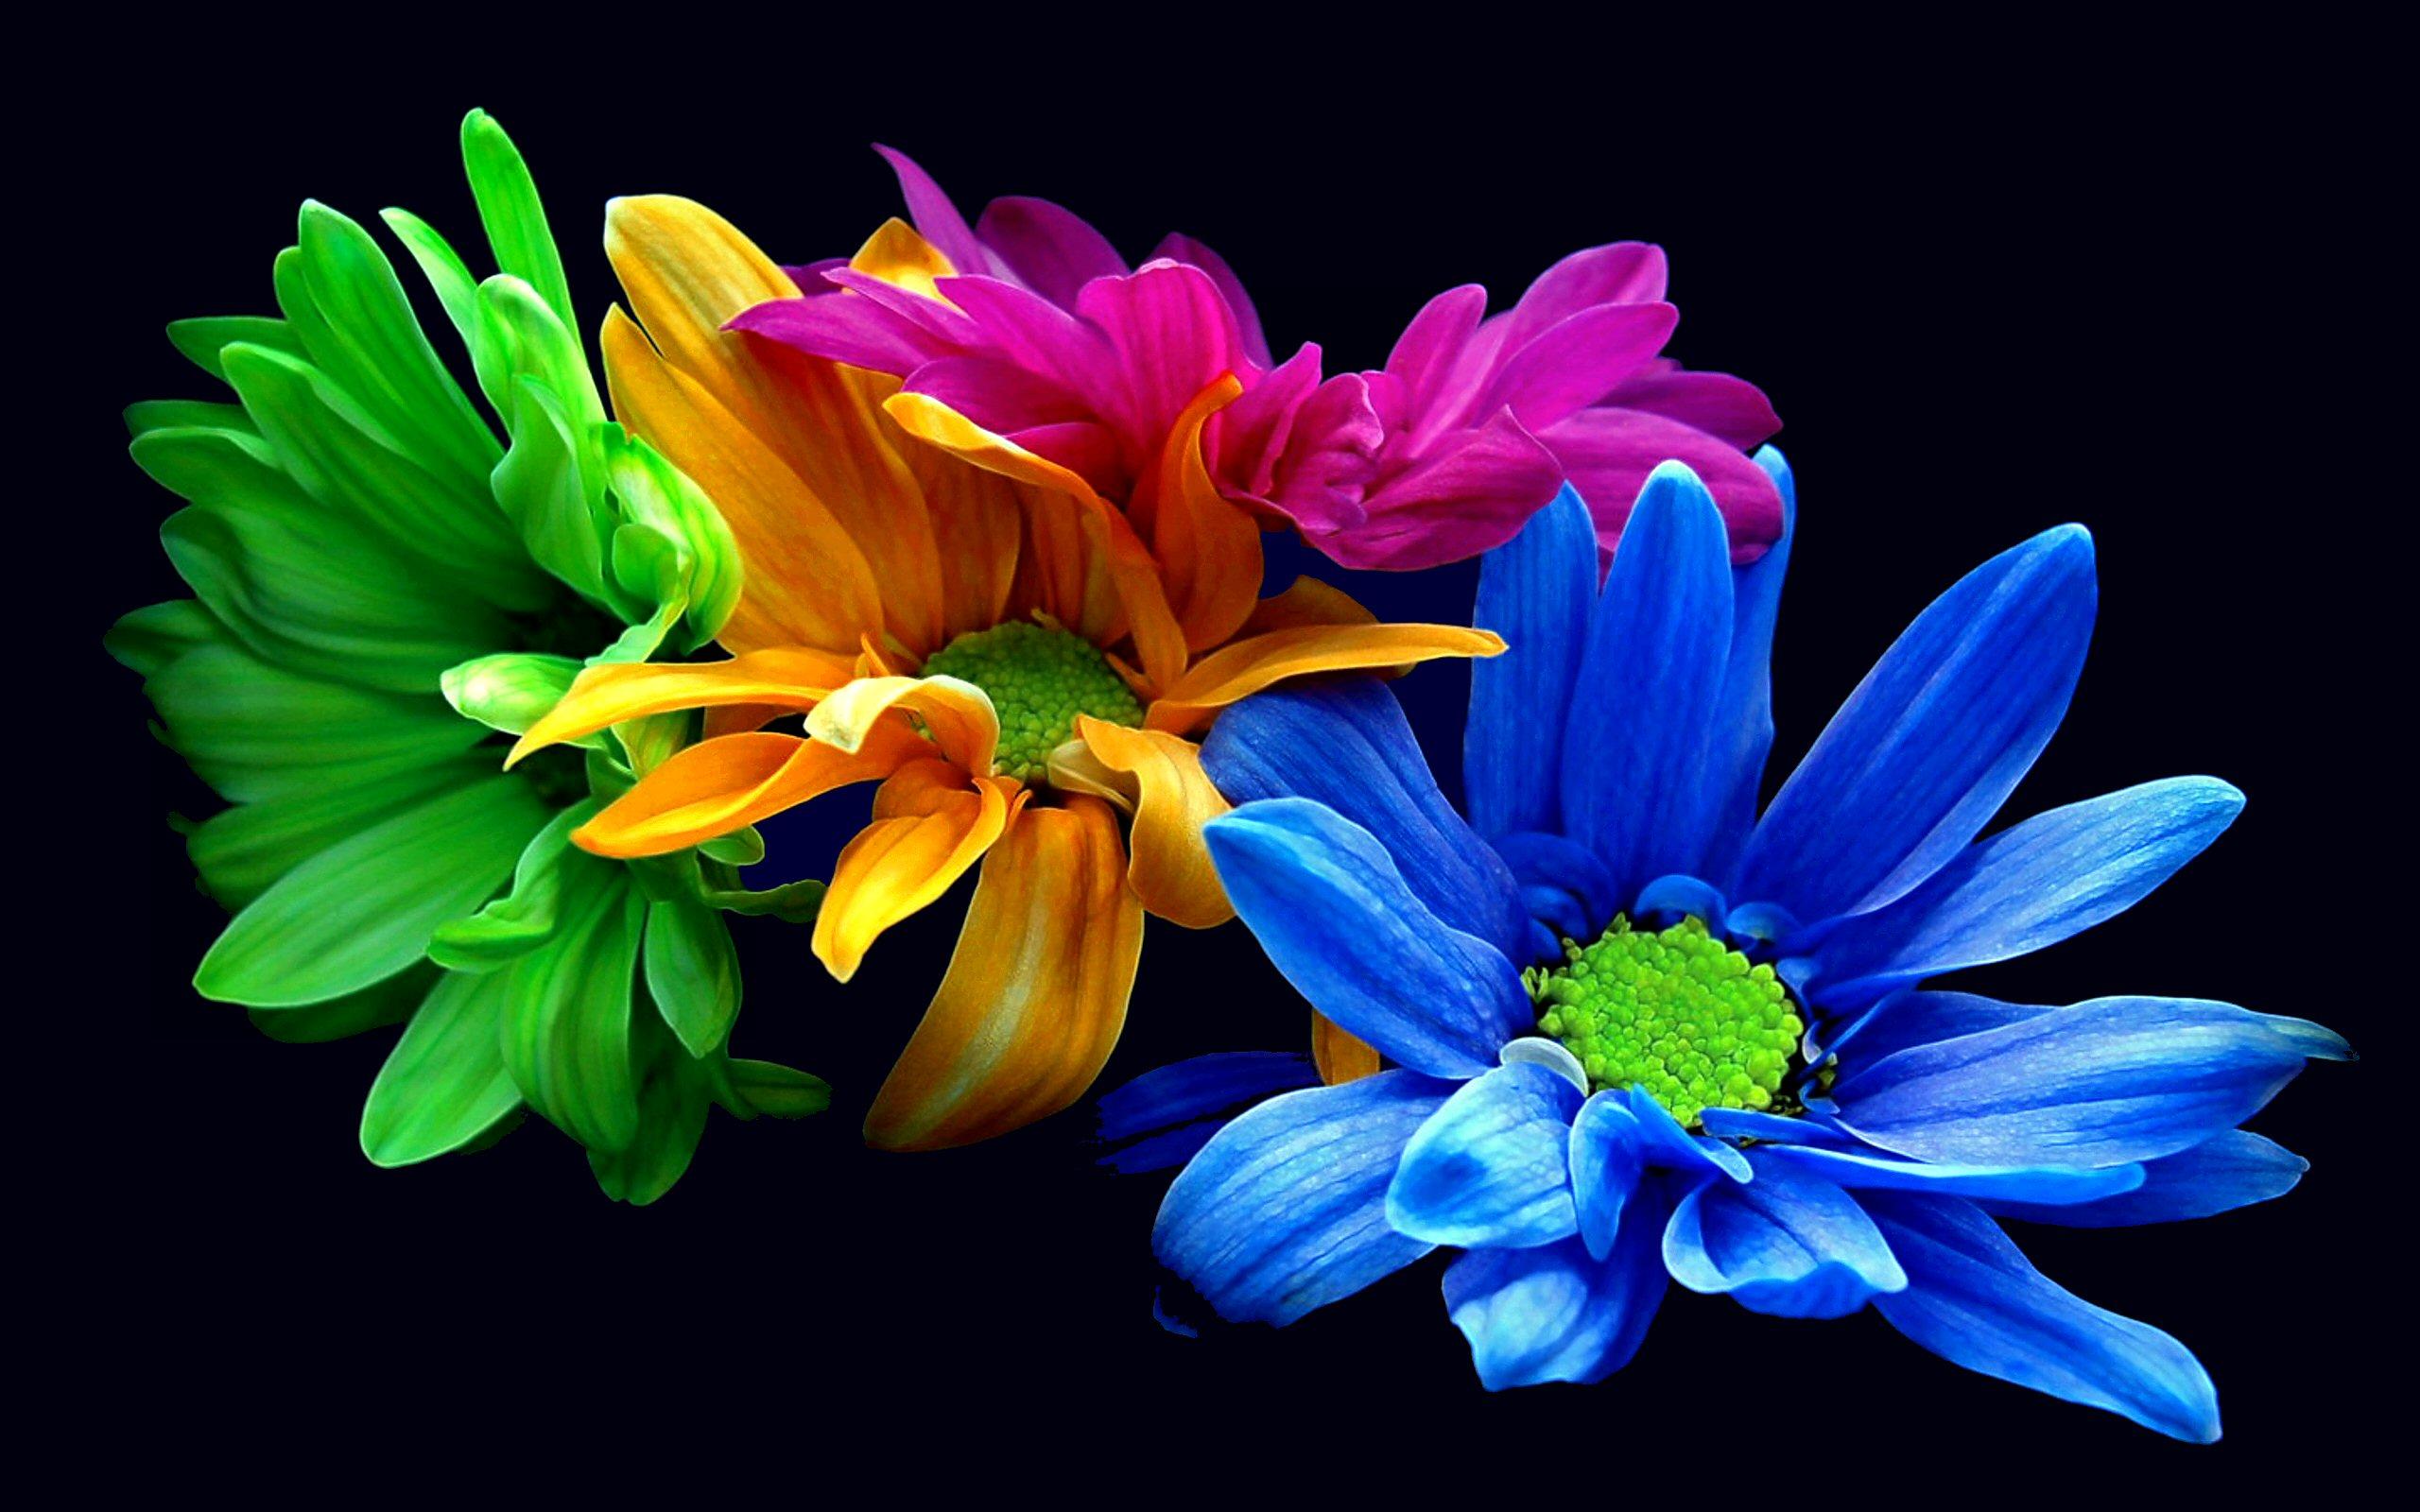 Most Flower Wallpaper World Colourful High Resolution Photo Earth